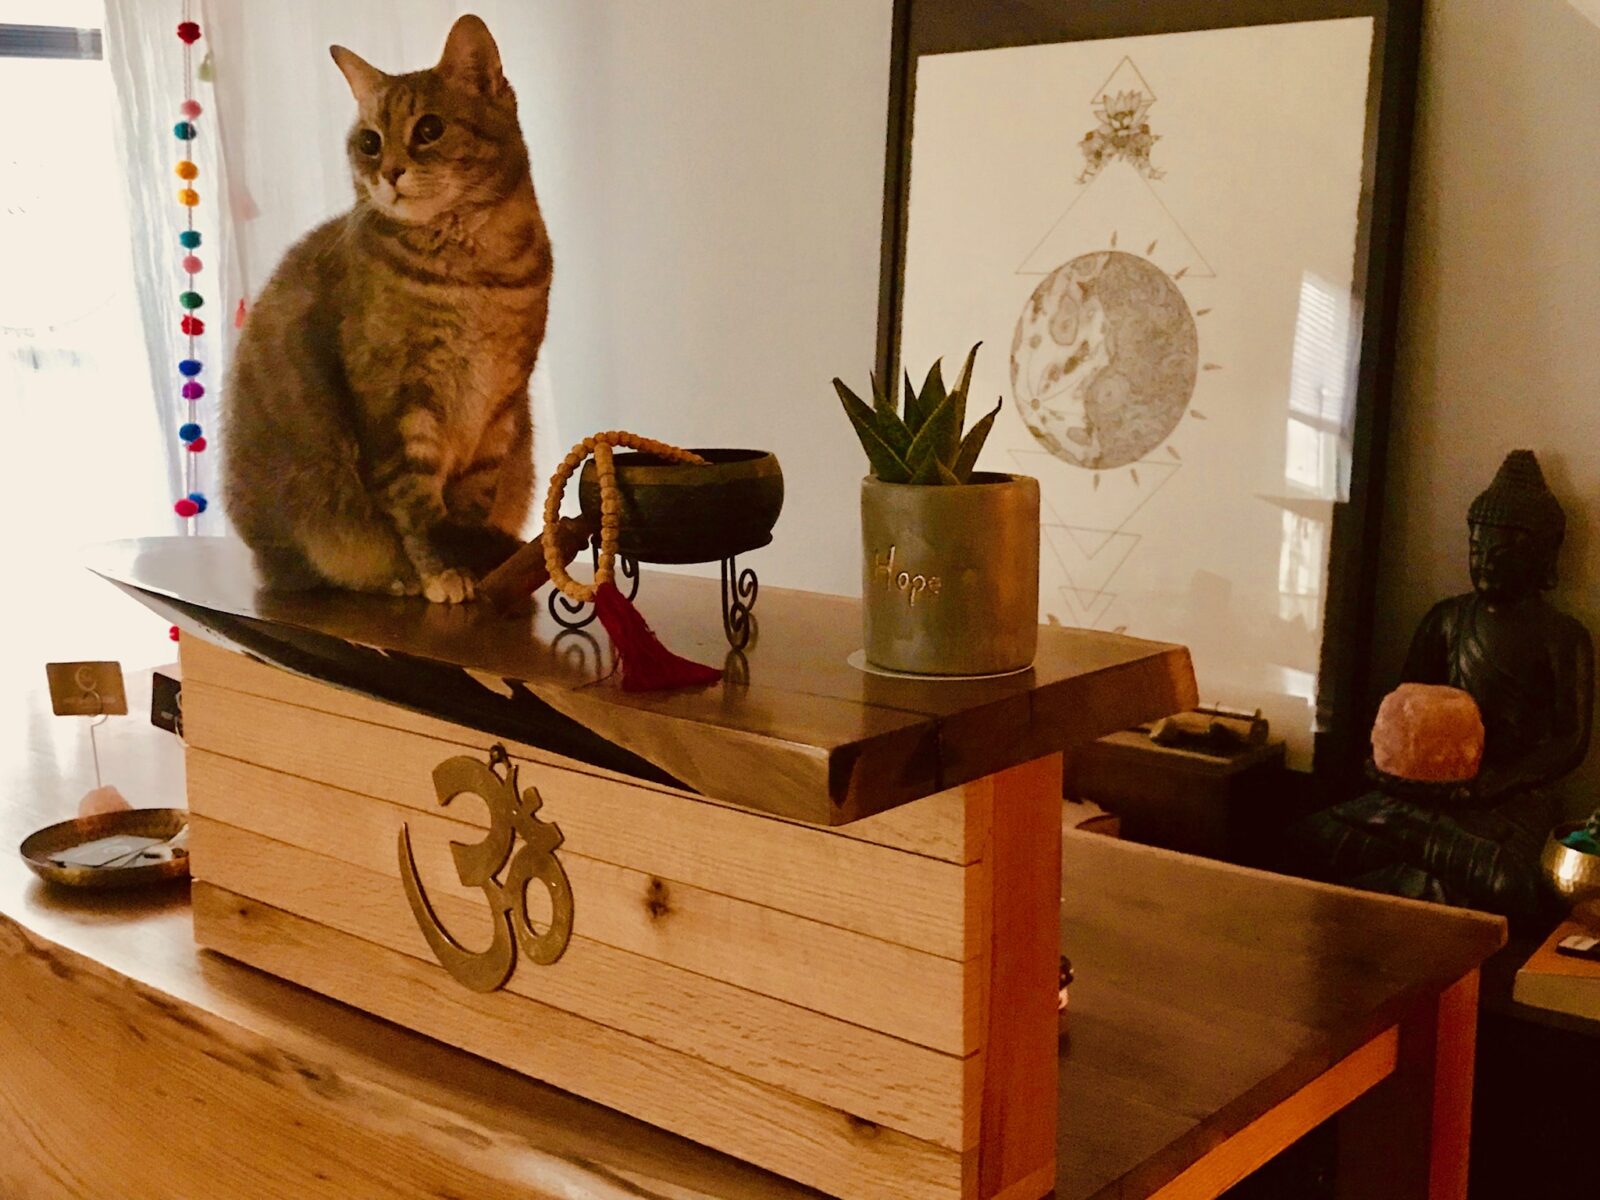 Our kitty cat offers her blessing to our reception desk, hand-crafted by Vine & Branch, right here on 146th Street